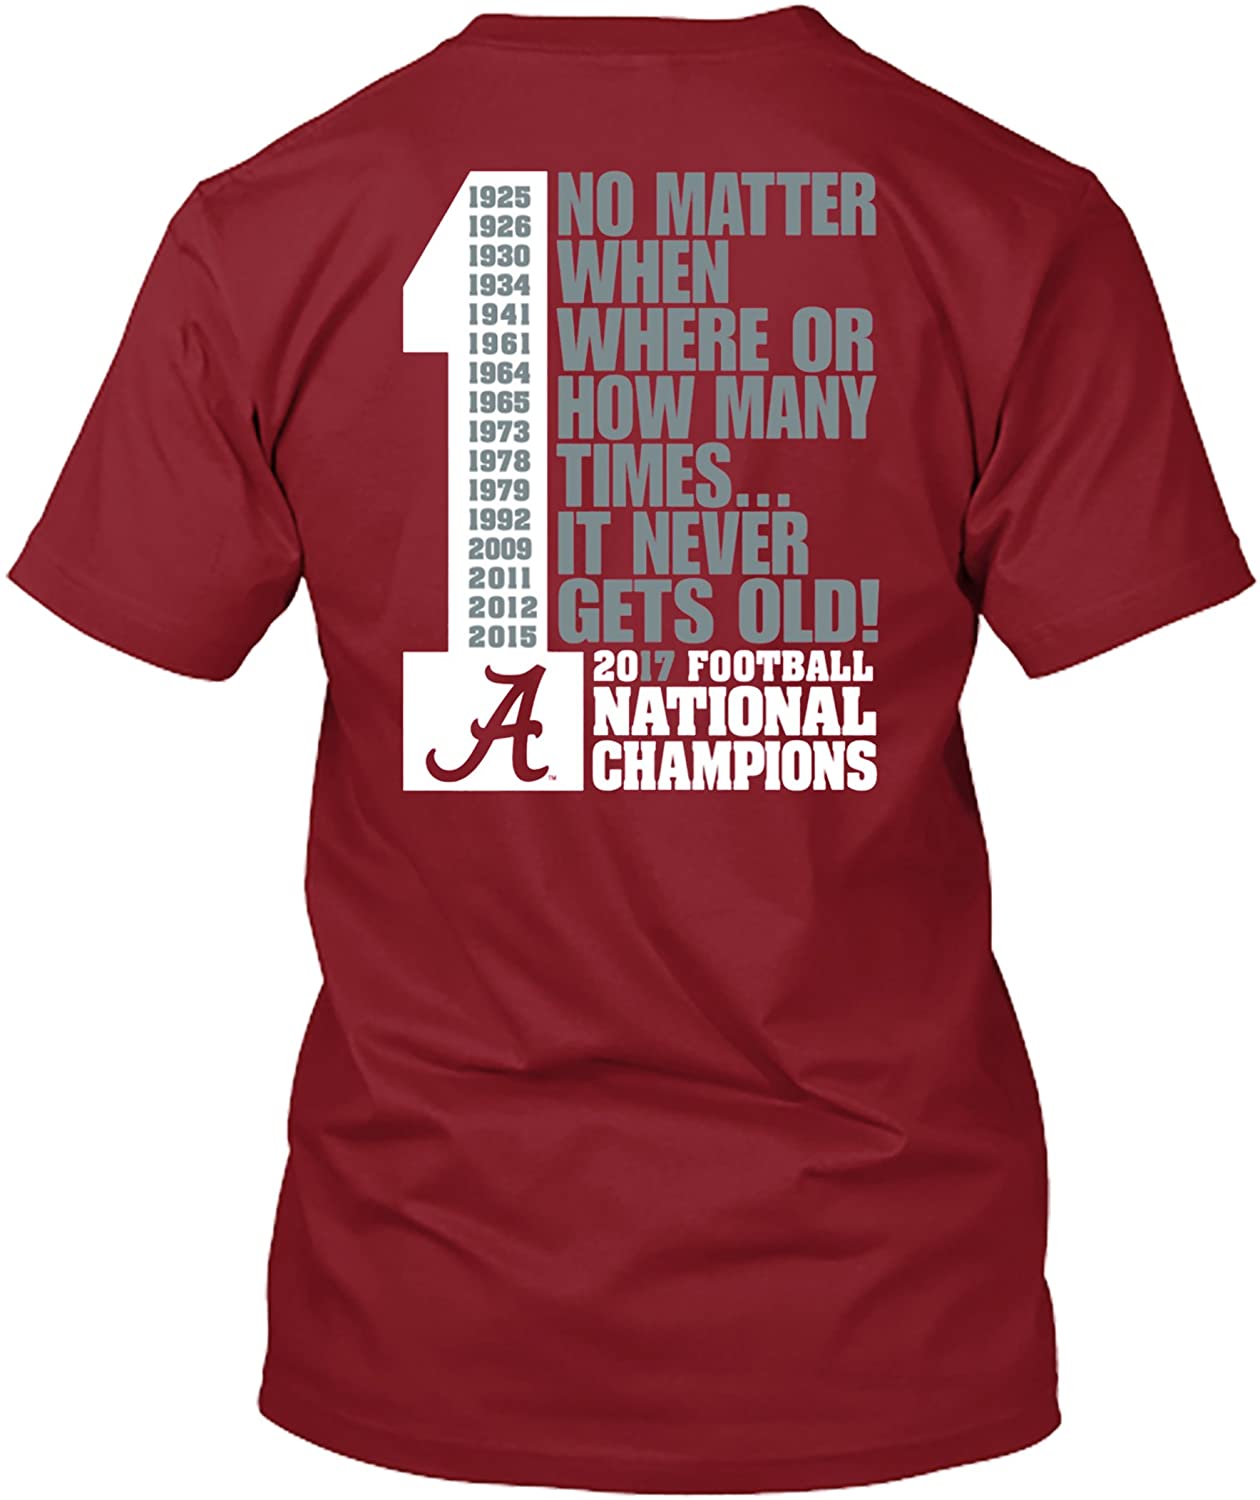 Alabama Crimson Tide T-Shirt - New World Graphics - No Matter When Where Or How Many Time - It Never Gets Old - Football - Crimson